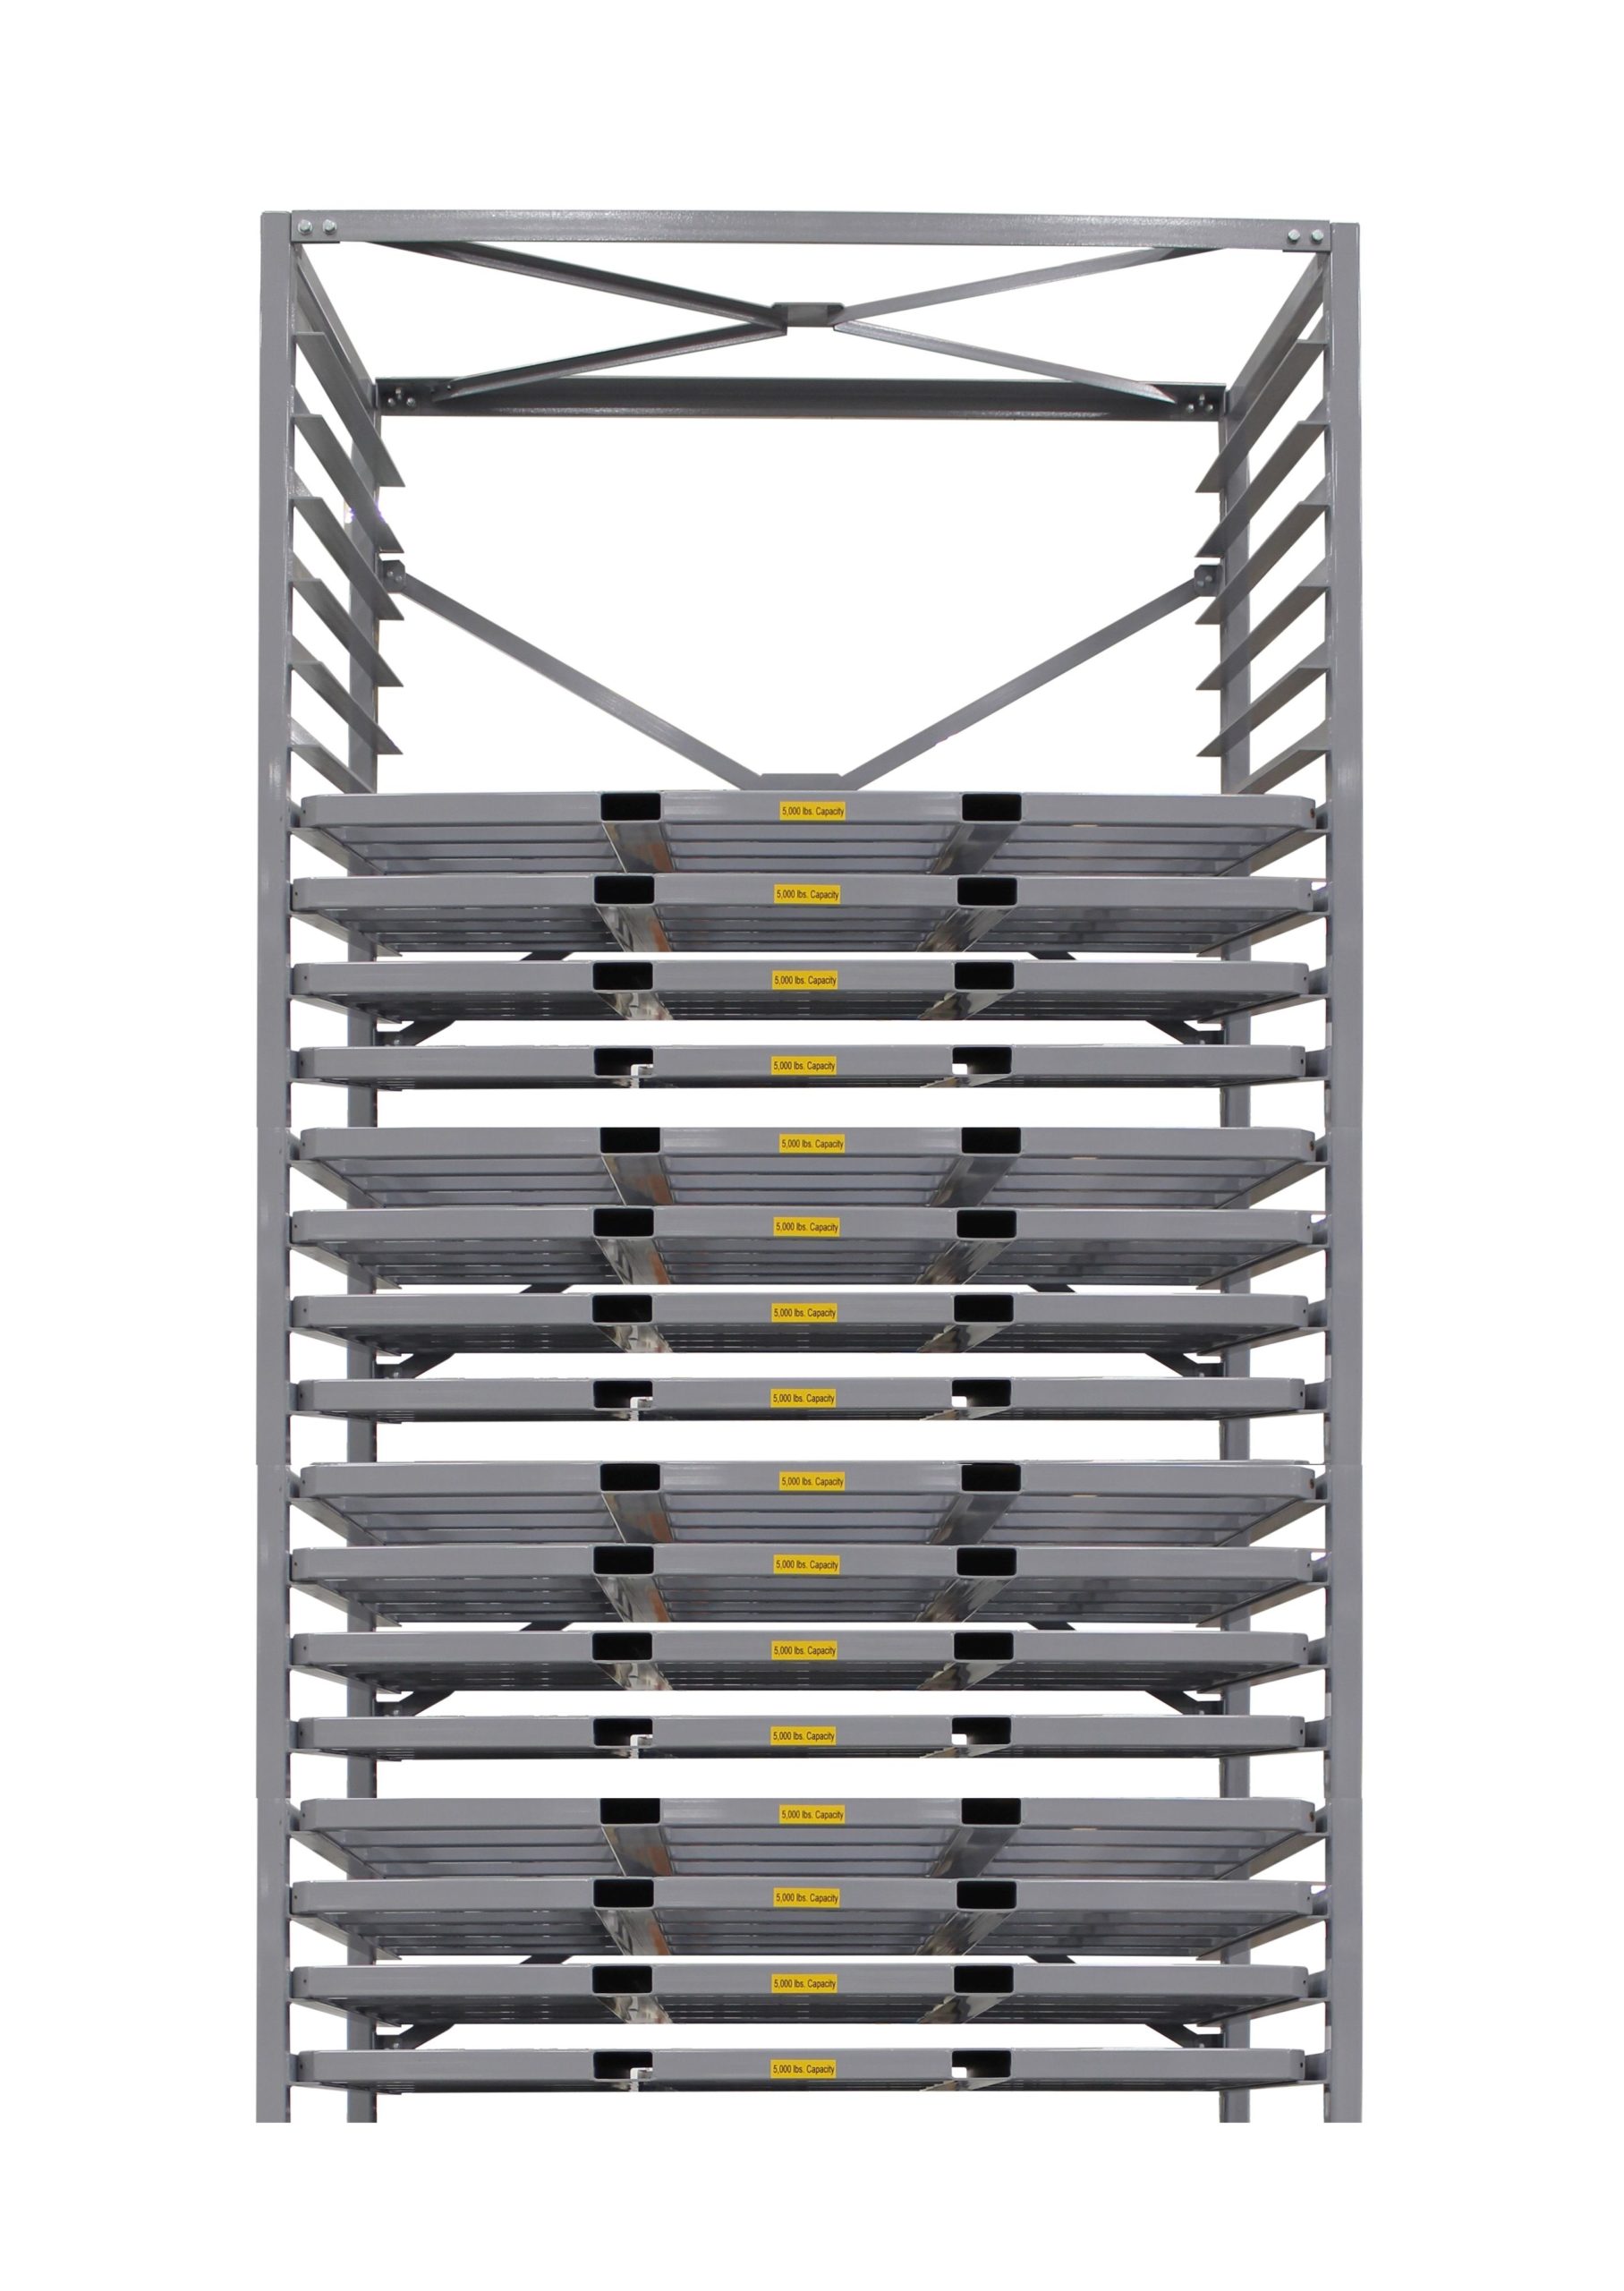 Details about   Steel Dunnage Rack 48x18x6 pallet stand 